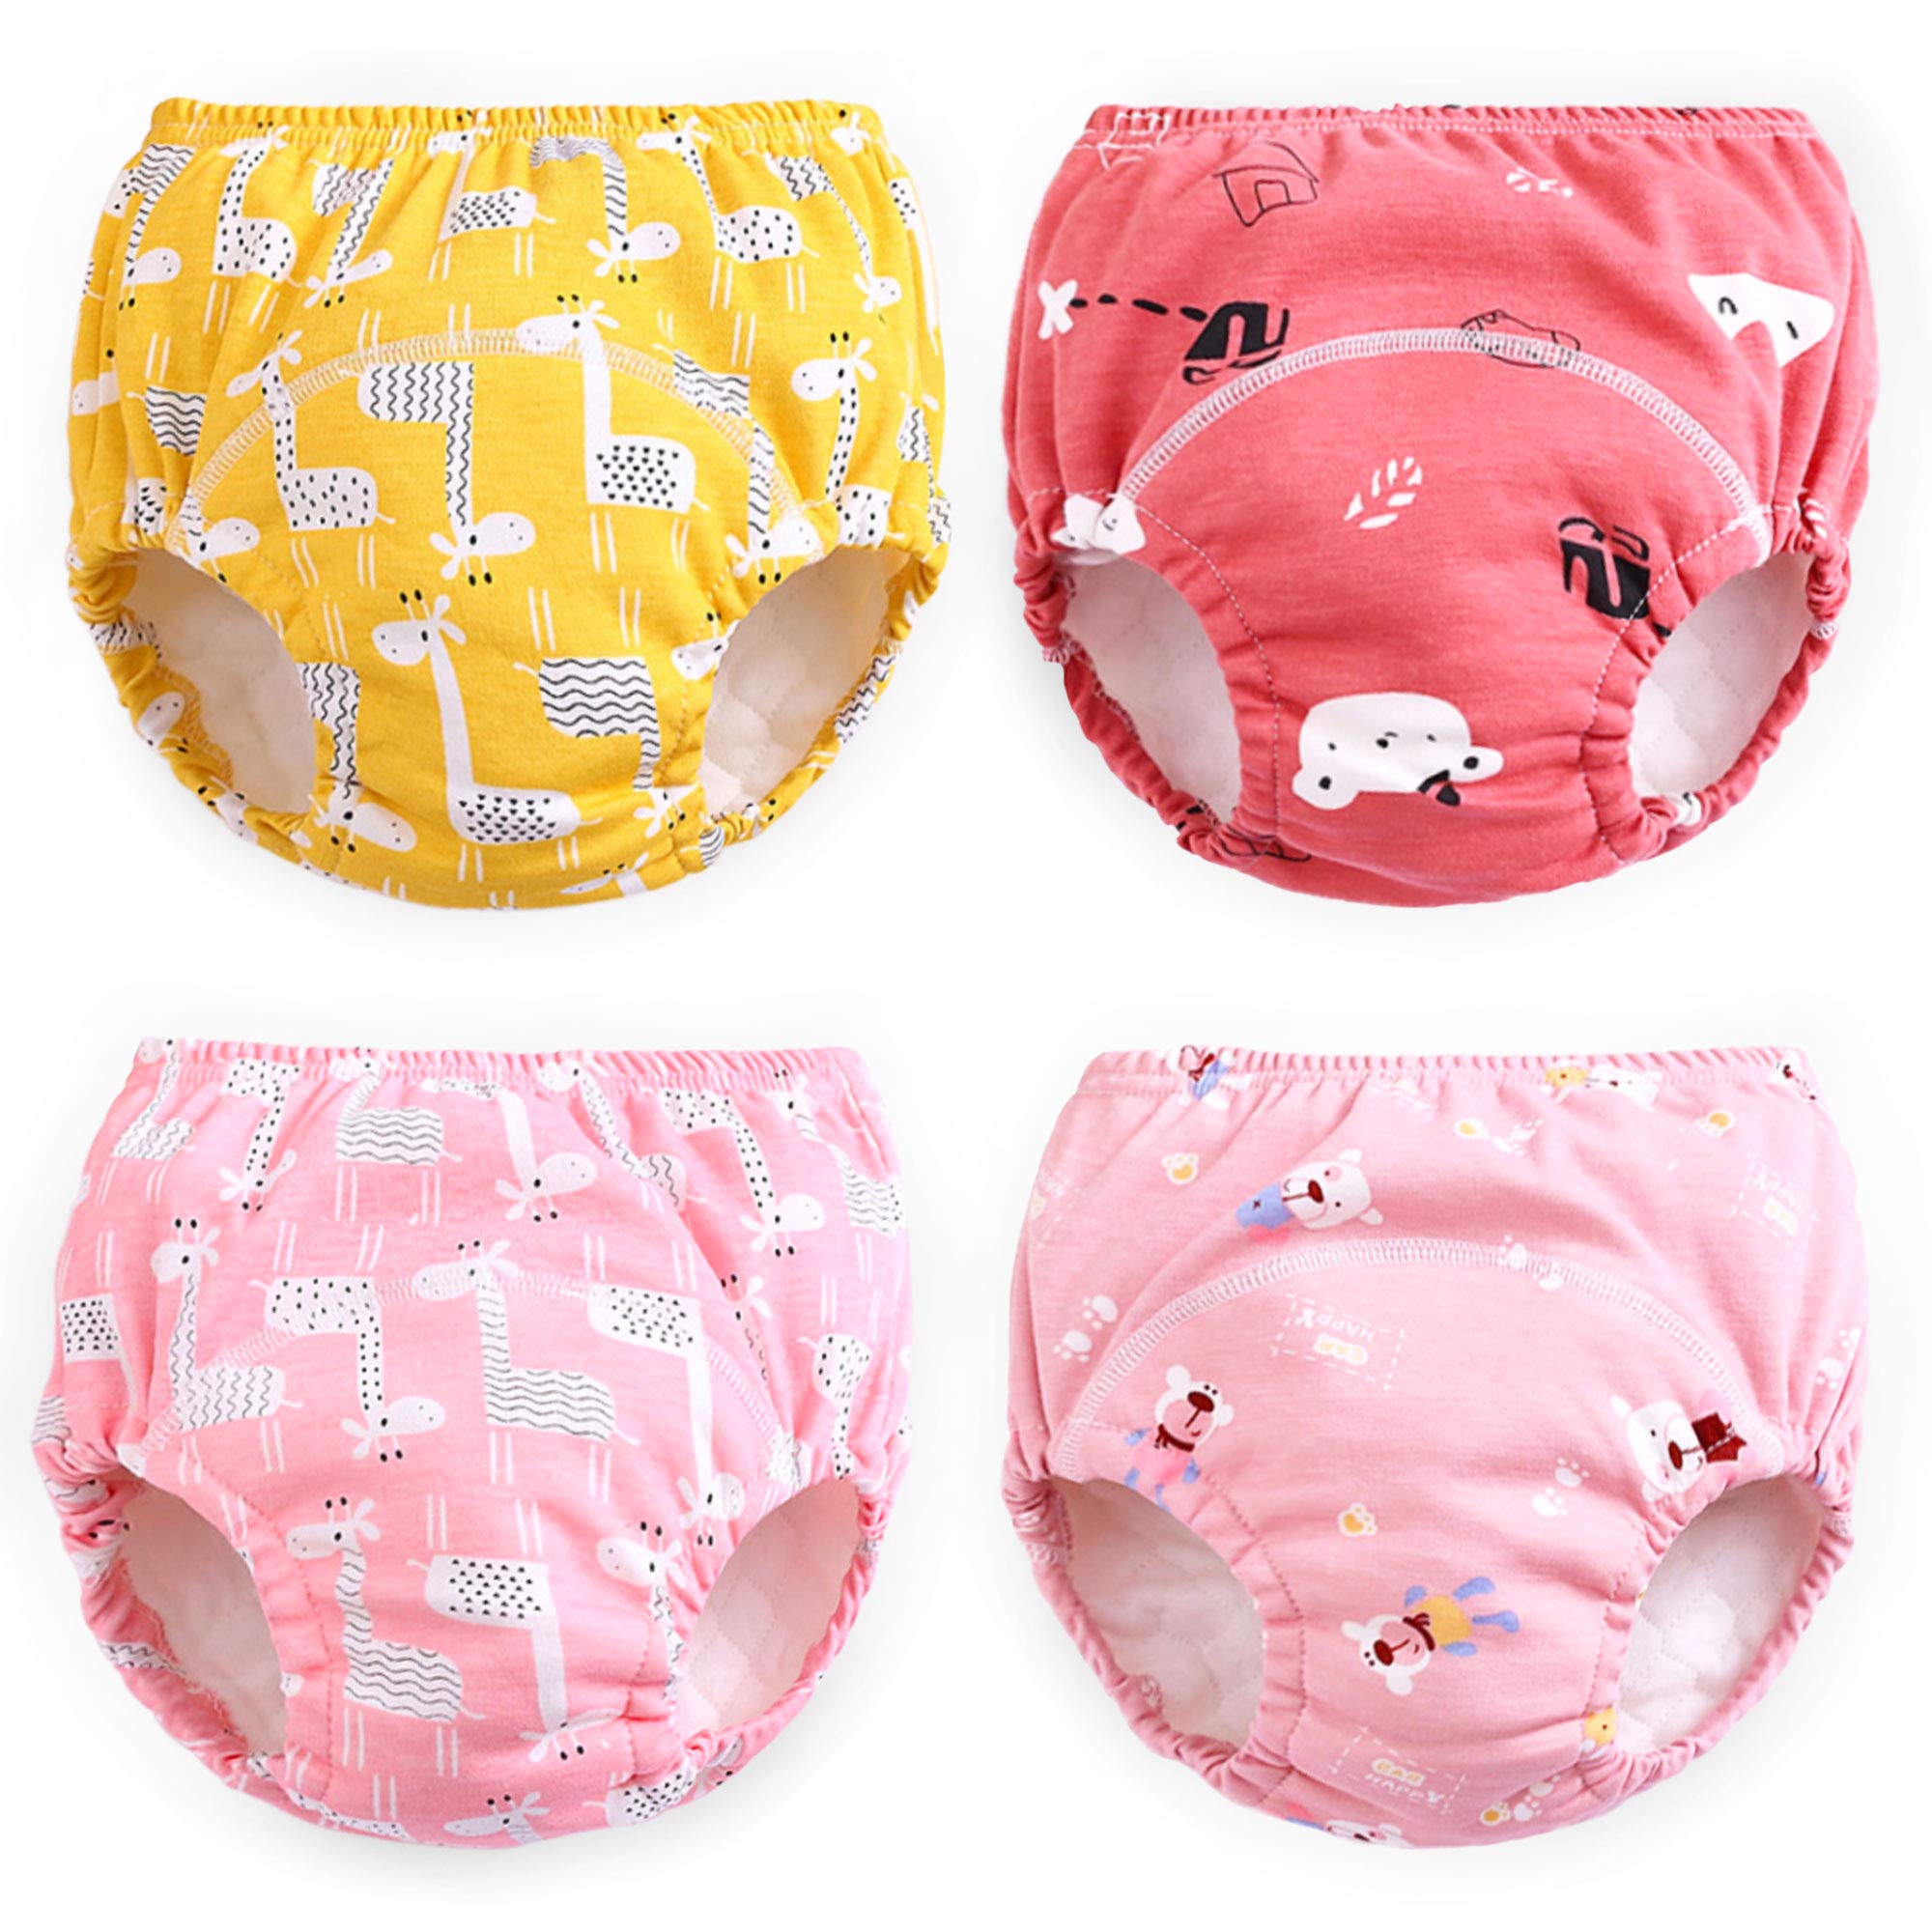 Potty Training Pants Girls 2T,3T,4T,Toddler Training Underwear for Baby  Girls 4 Pack Red 2T